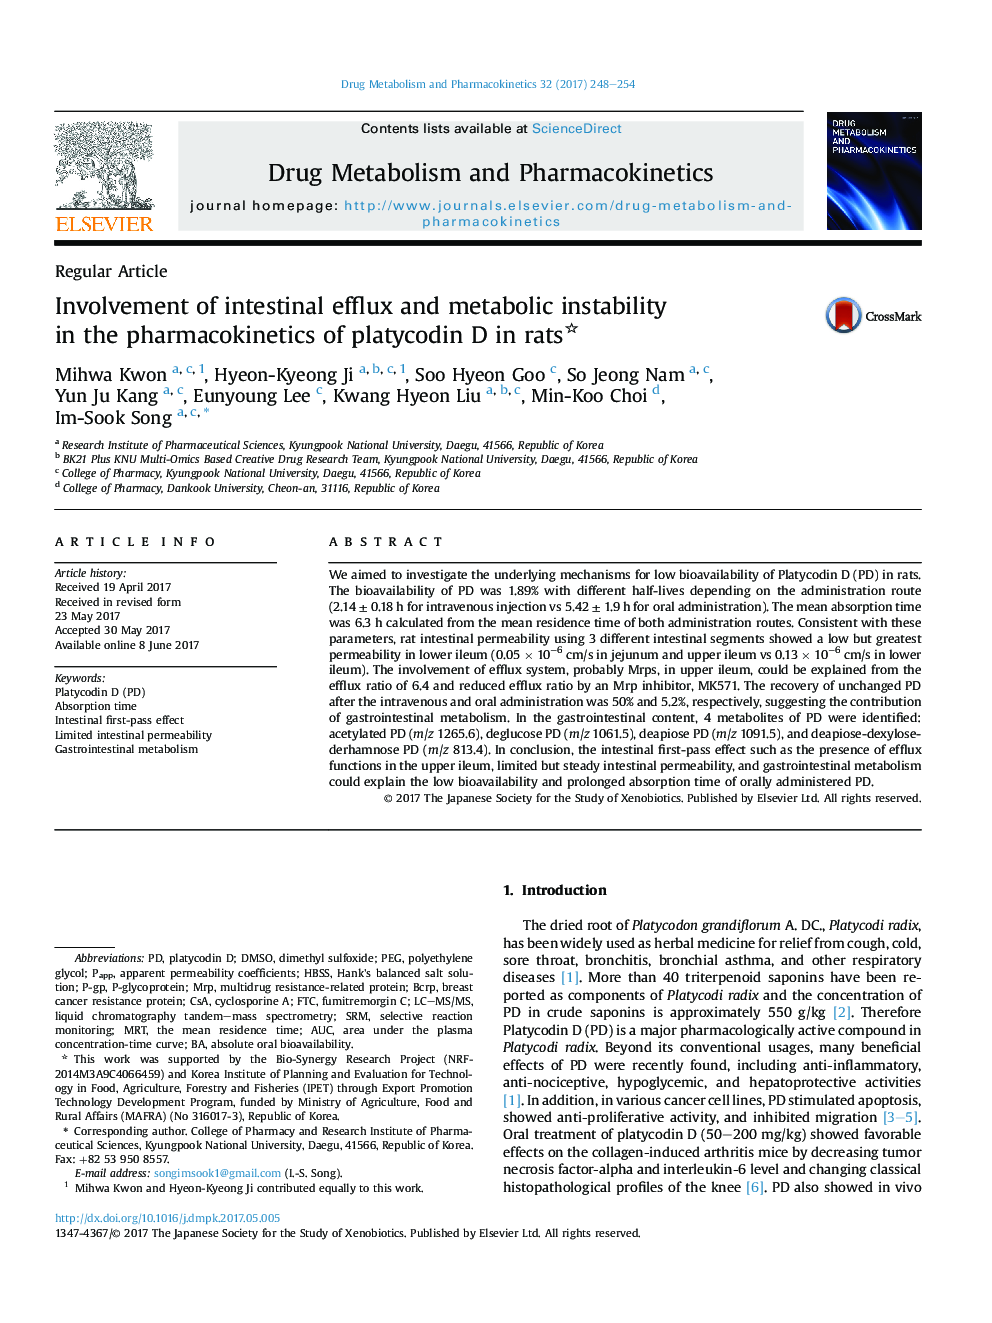 Involvement of intestinal efflux and metabolic instability inÂ theÂ pharmacokinetics of platycodin D in rats